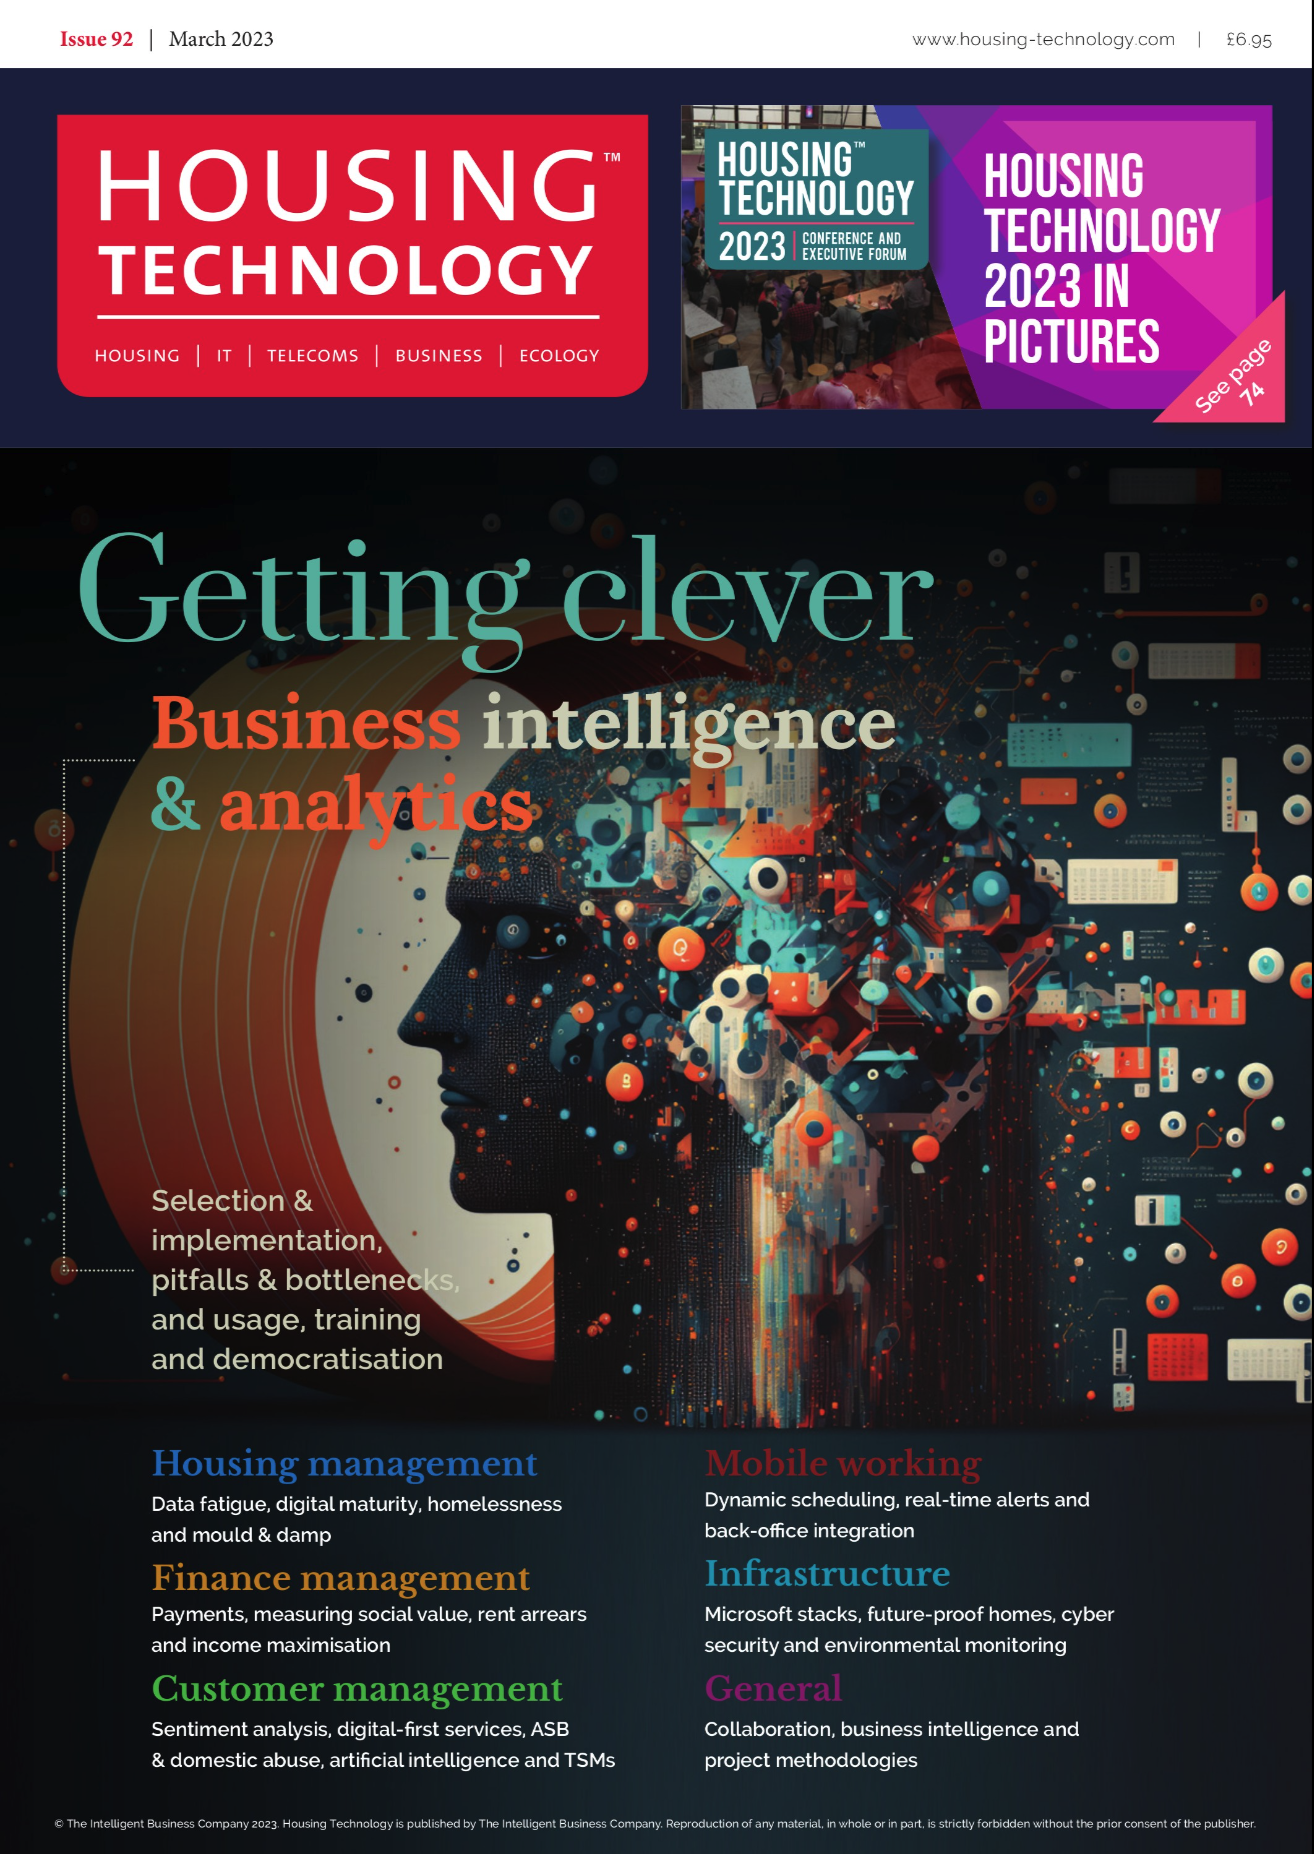 Housing Technology magazine issue 92 cover